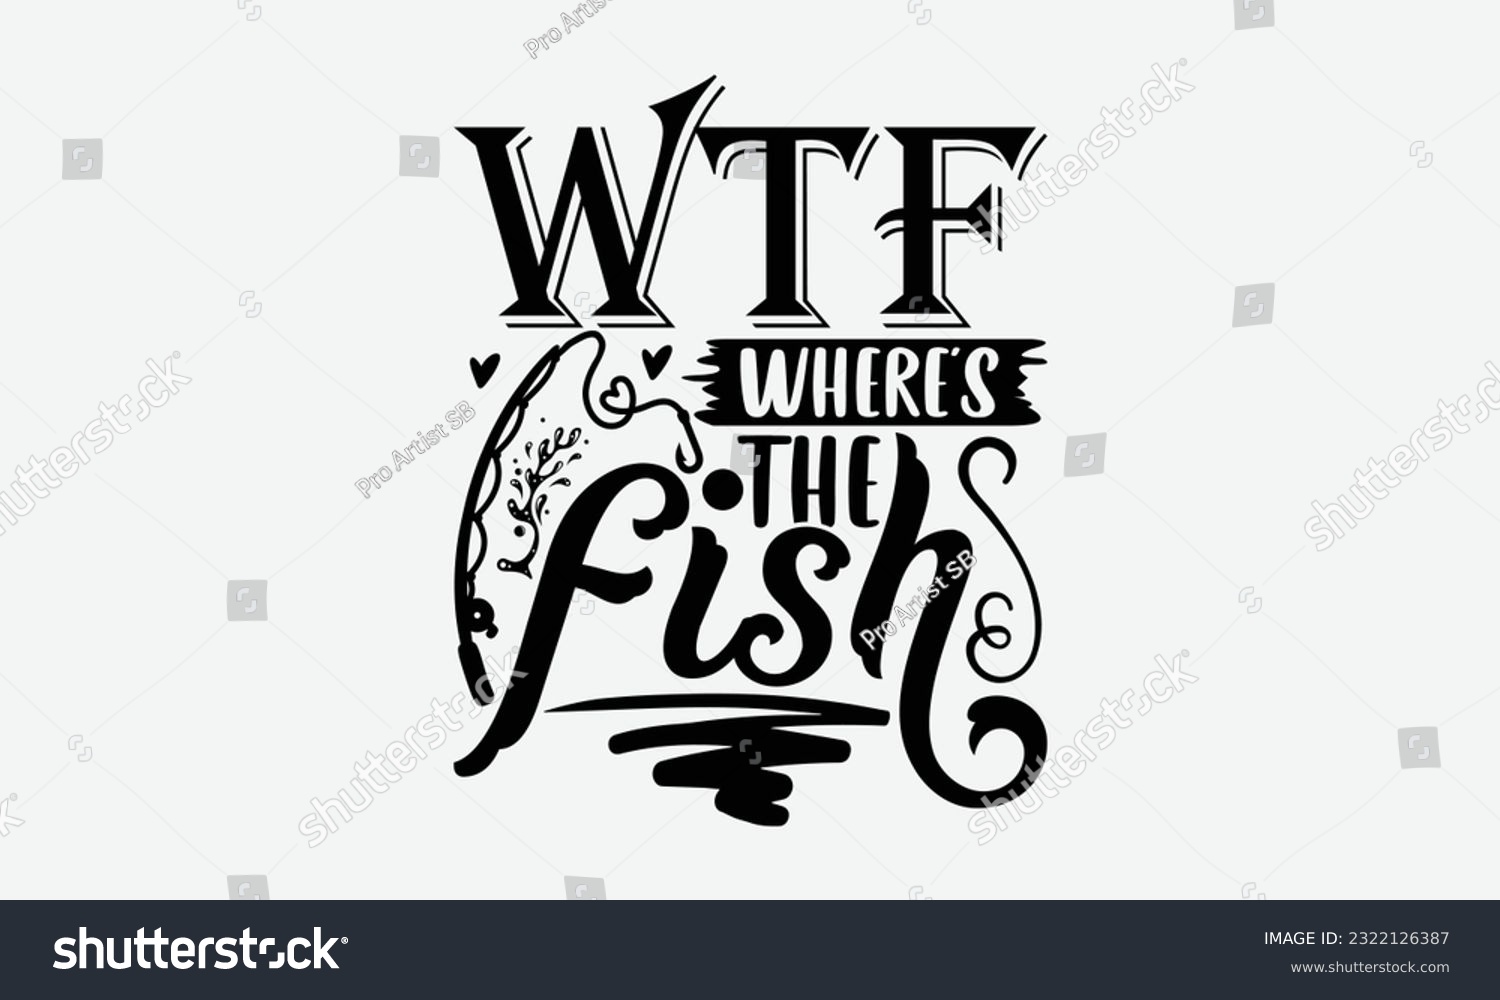 SVG of Wtf Where’s The Fish - Fishing SVG Design, Fisherman Quotes, Handmade Calligraphy Vector Illustration, Isolated On White Background. svg